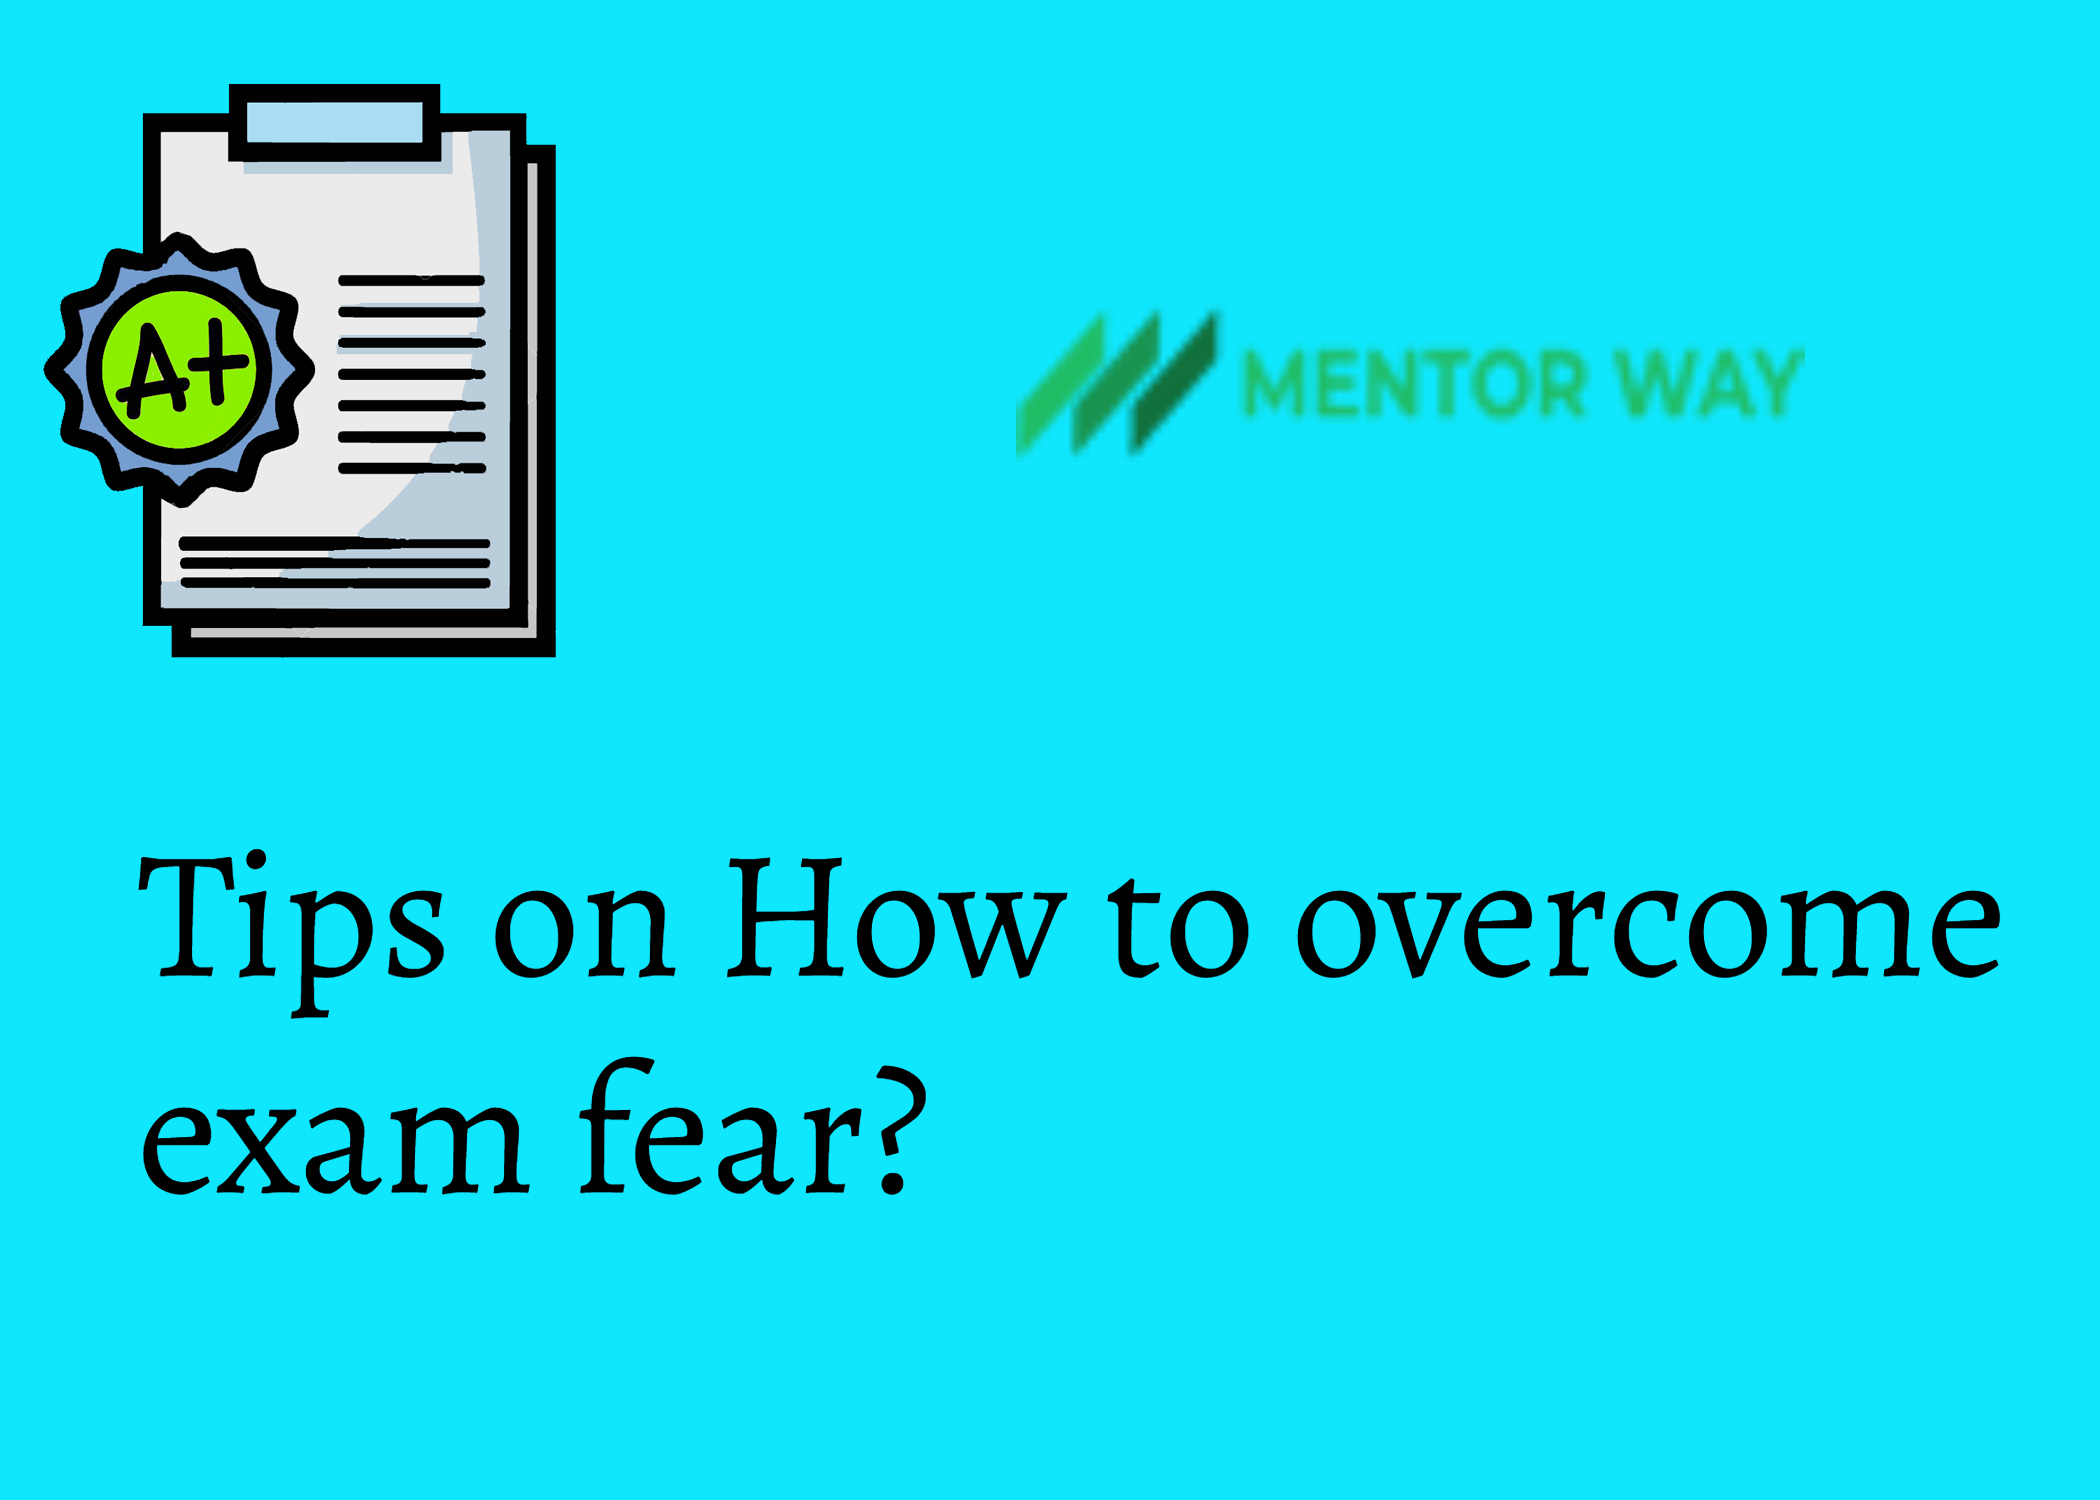 Tips on How to overcome exam fear?